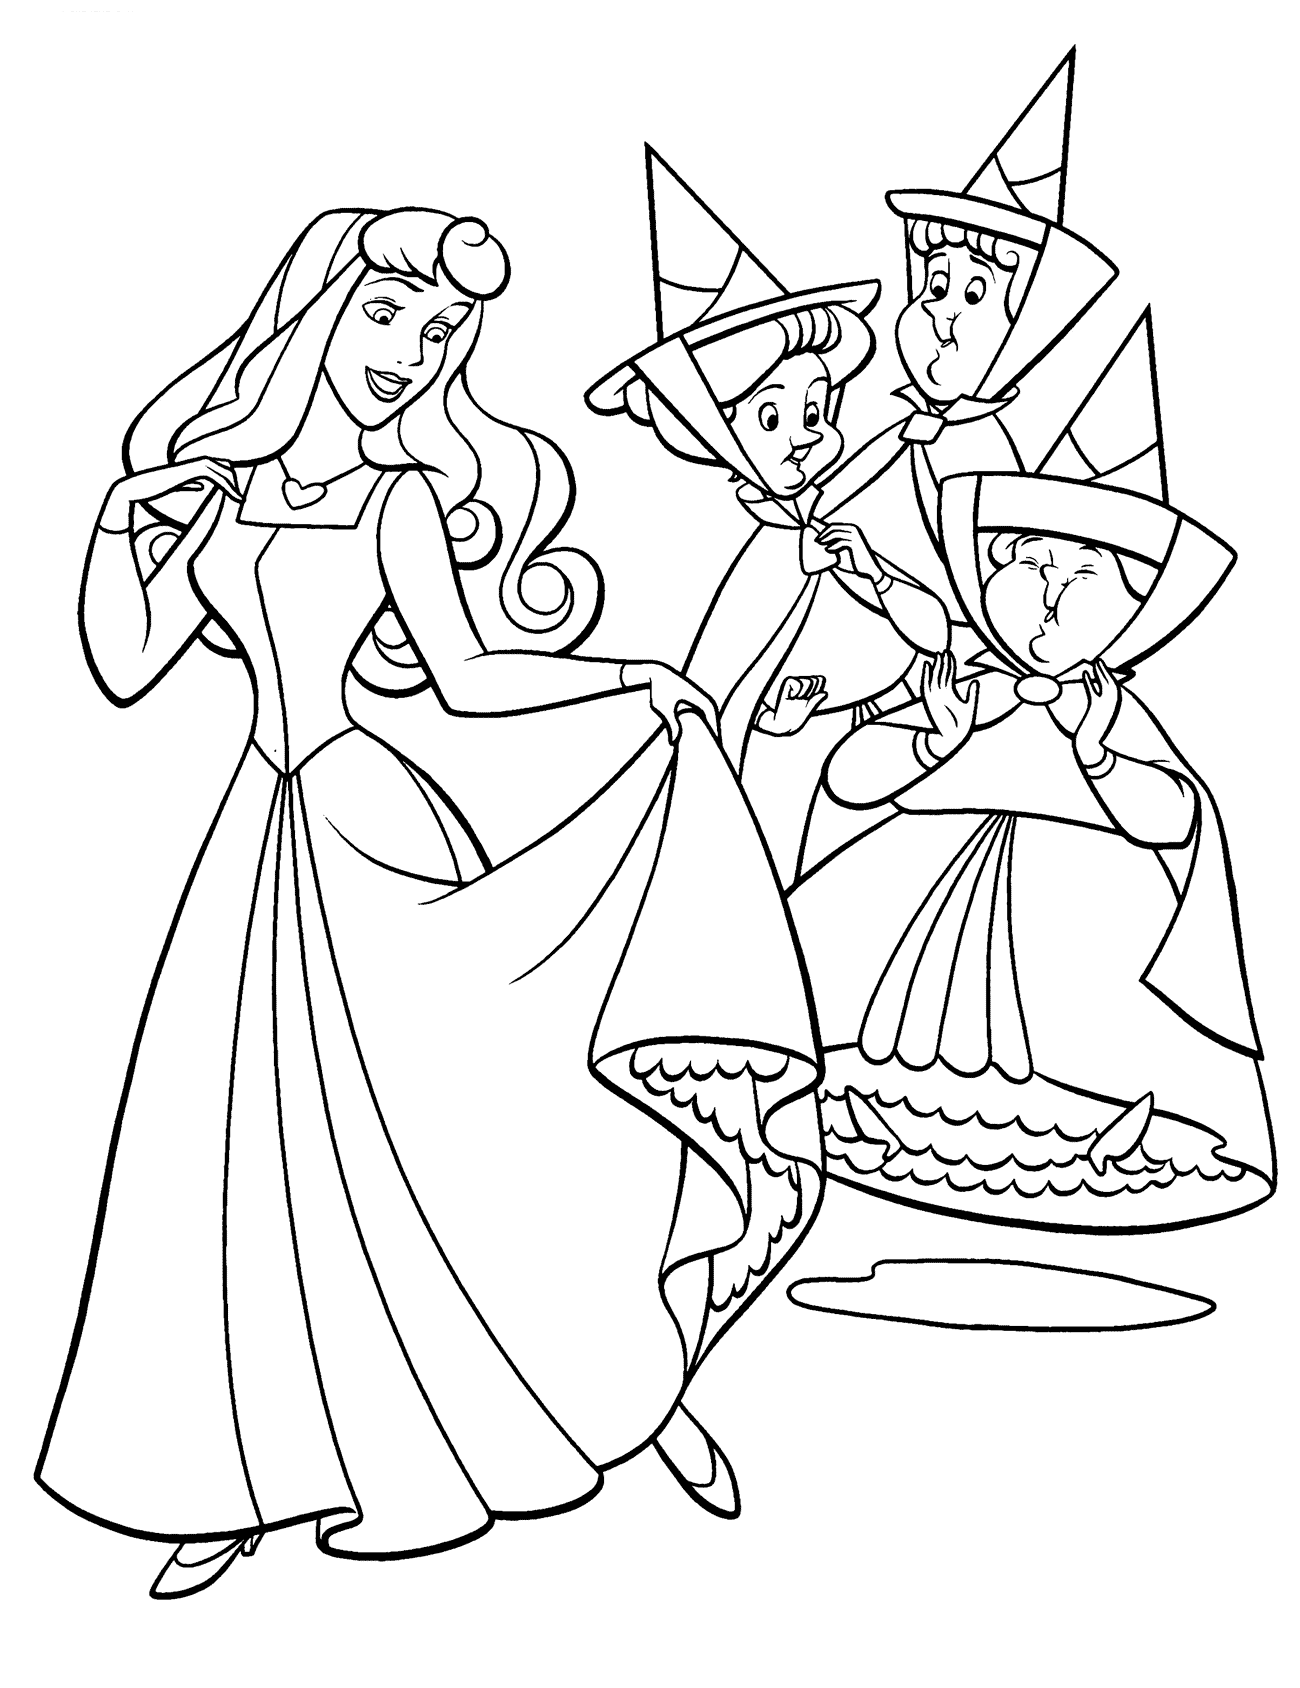 colouring pages of princesses and fairies fairy princess coloring pages fairy coloring princess and of pages colouring princesses fairies 